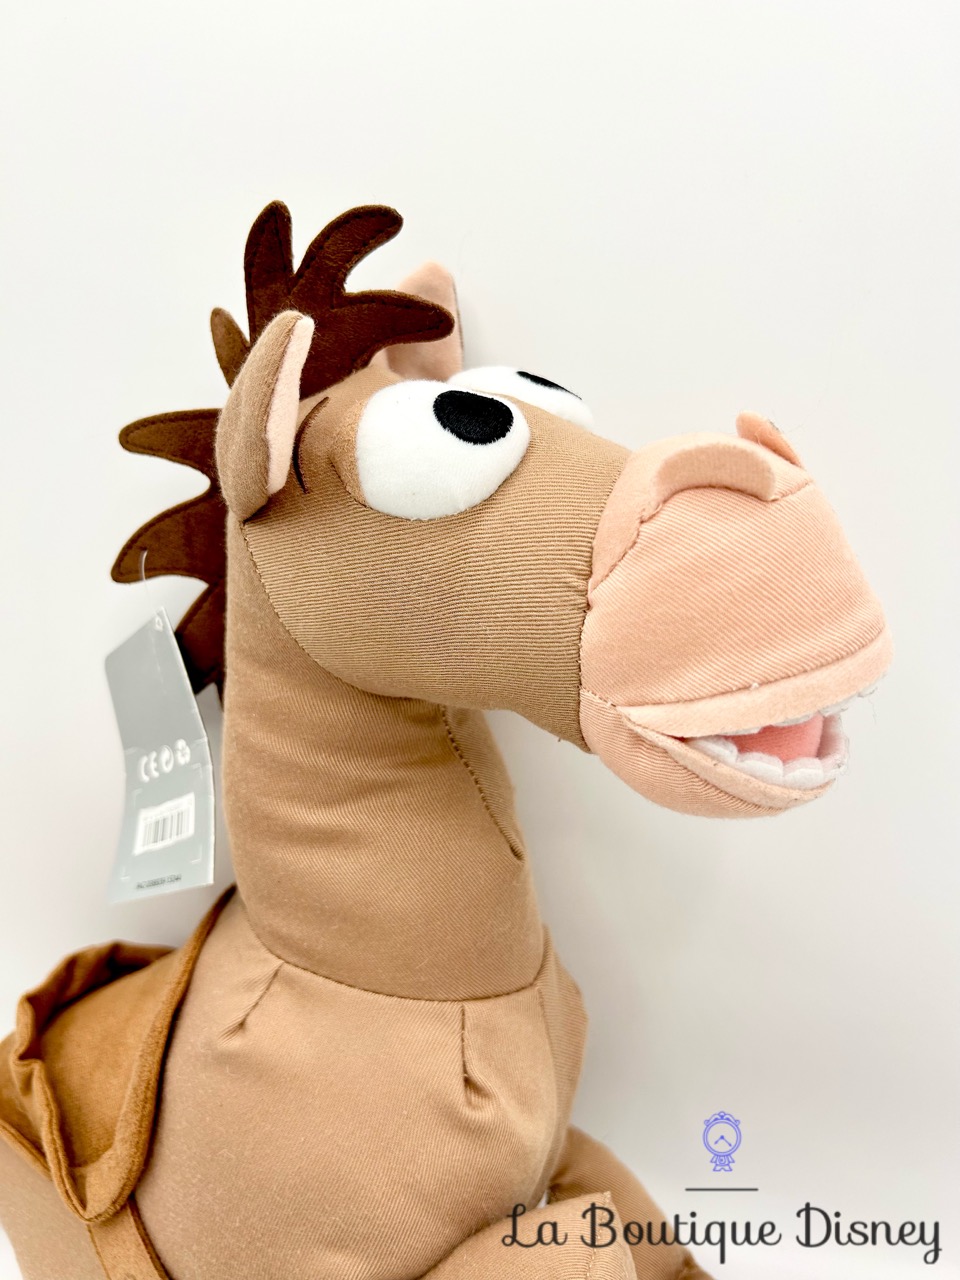 peluche-pile-poil-cheval-toy-story-disney-store-écusson-grand-format-4